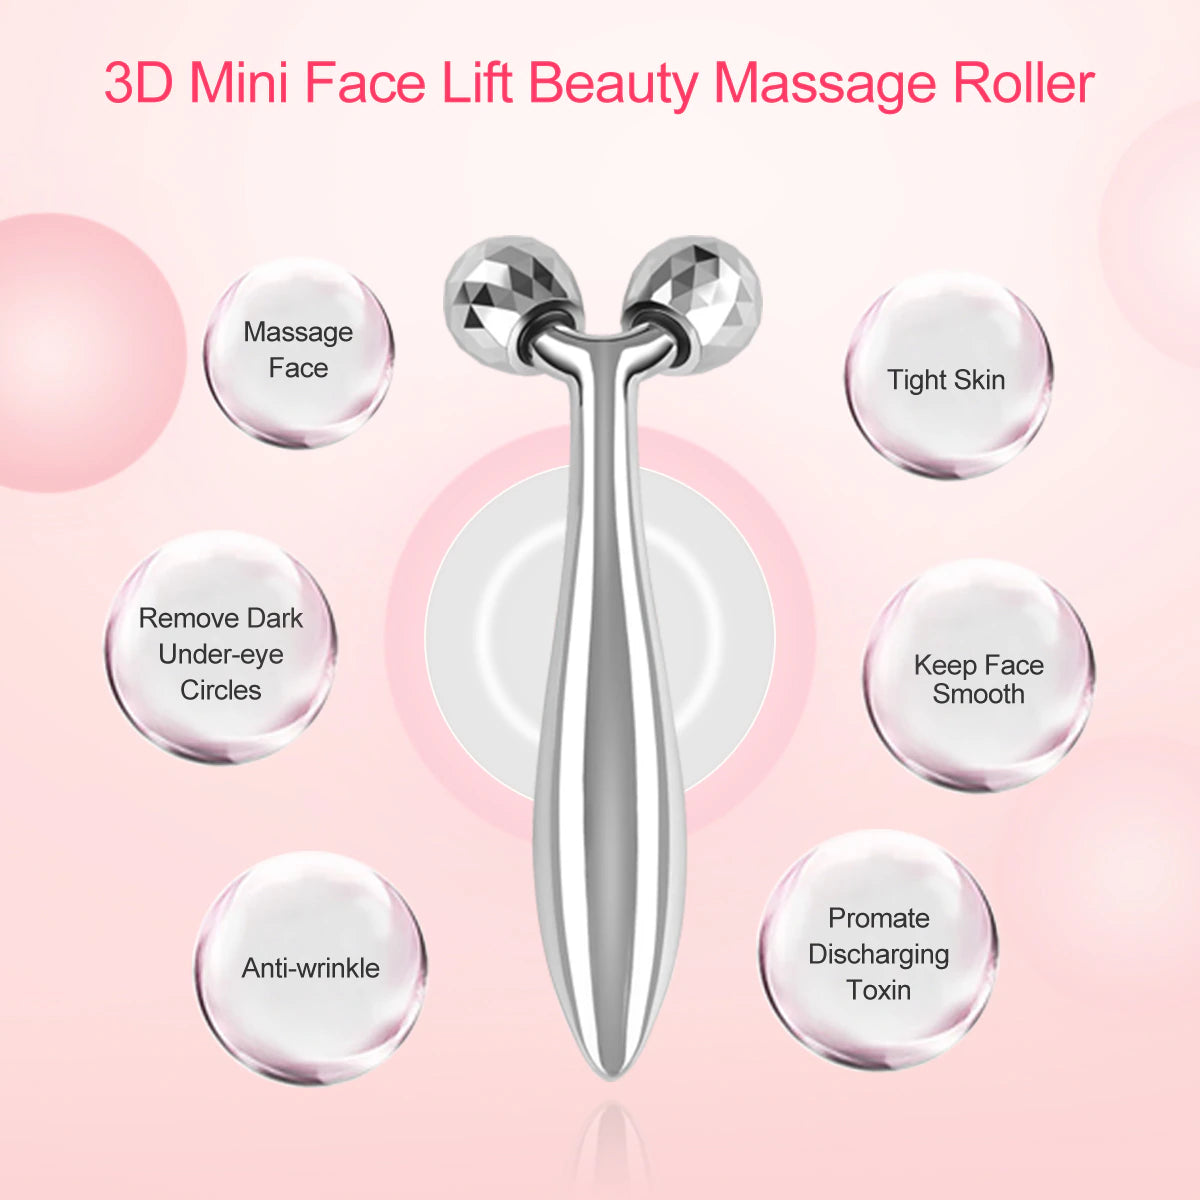 "Revitalize Your Skin with Our 3D Roller Massager - Achieve a Slimmer Face, Body Shaping, and Relaxation While Banishing Wrinkles!"